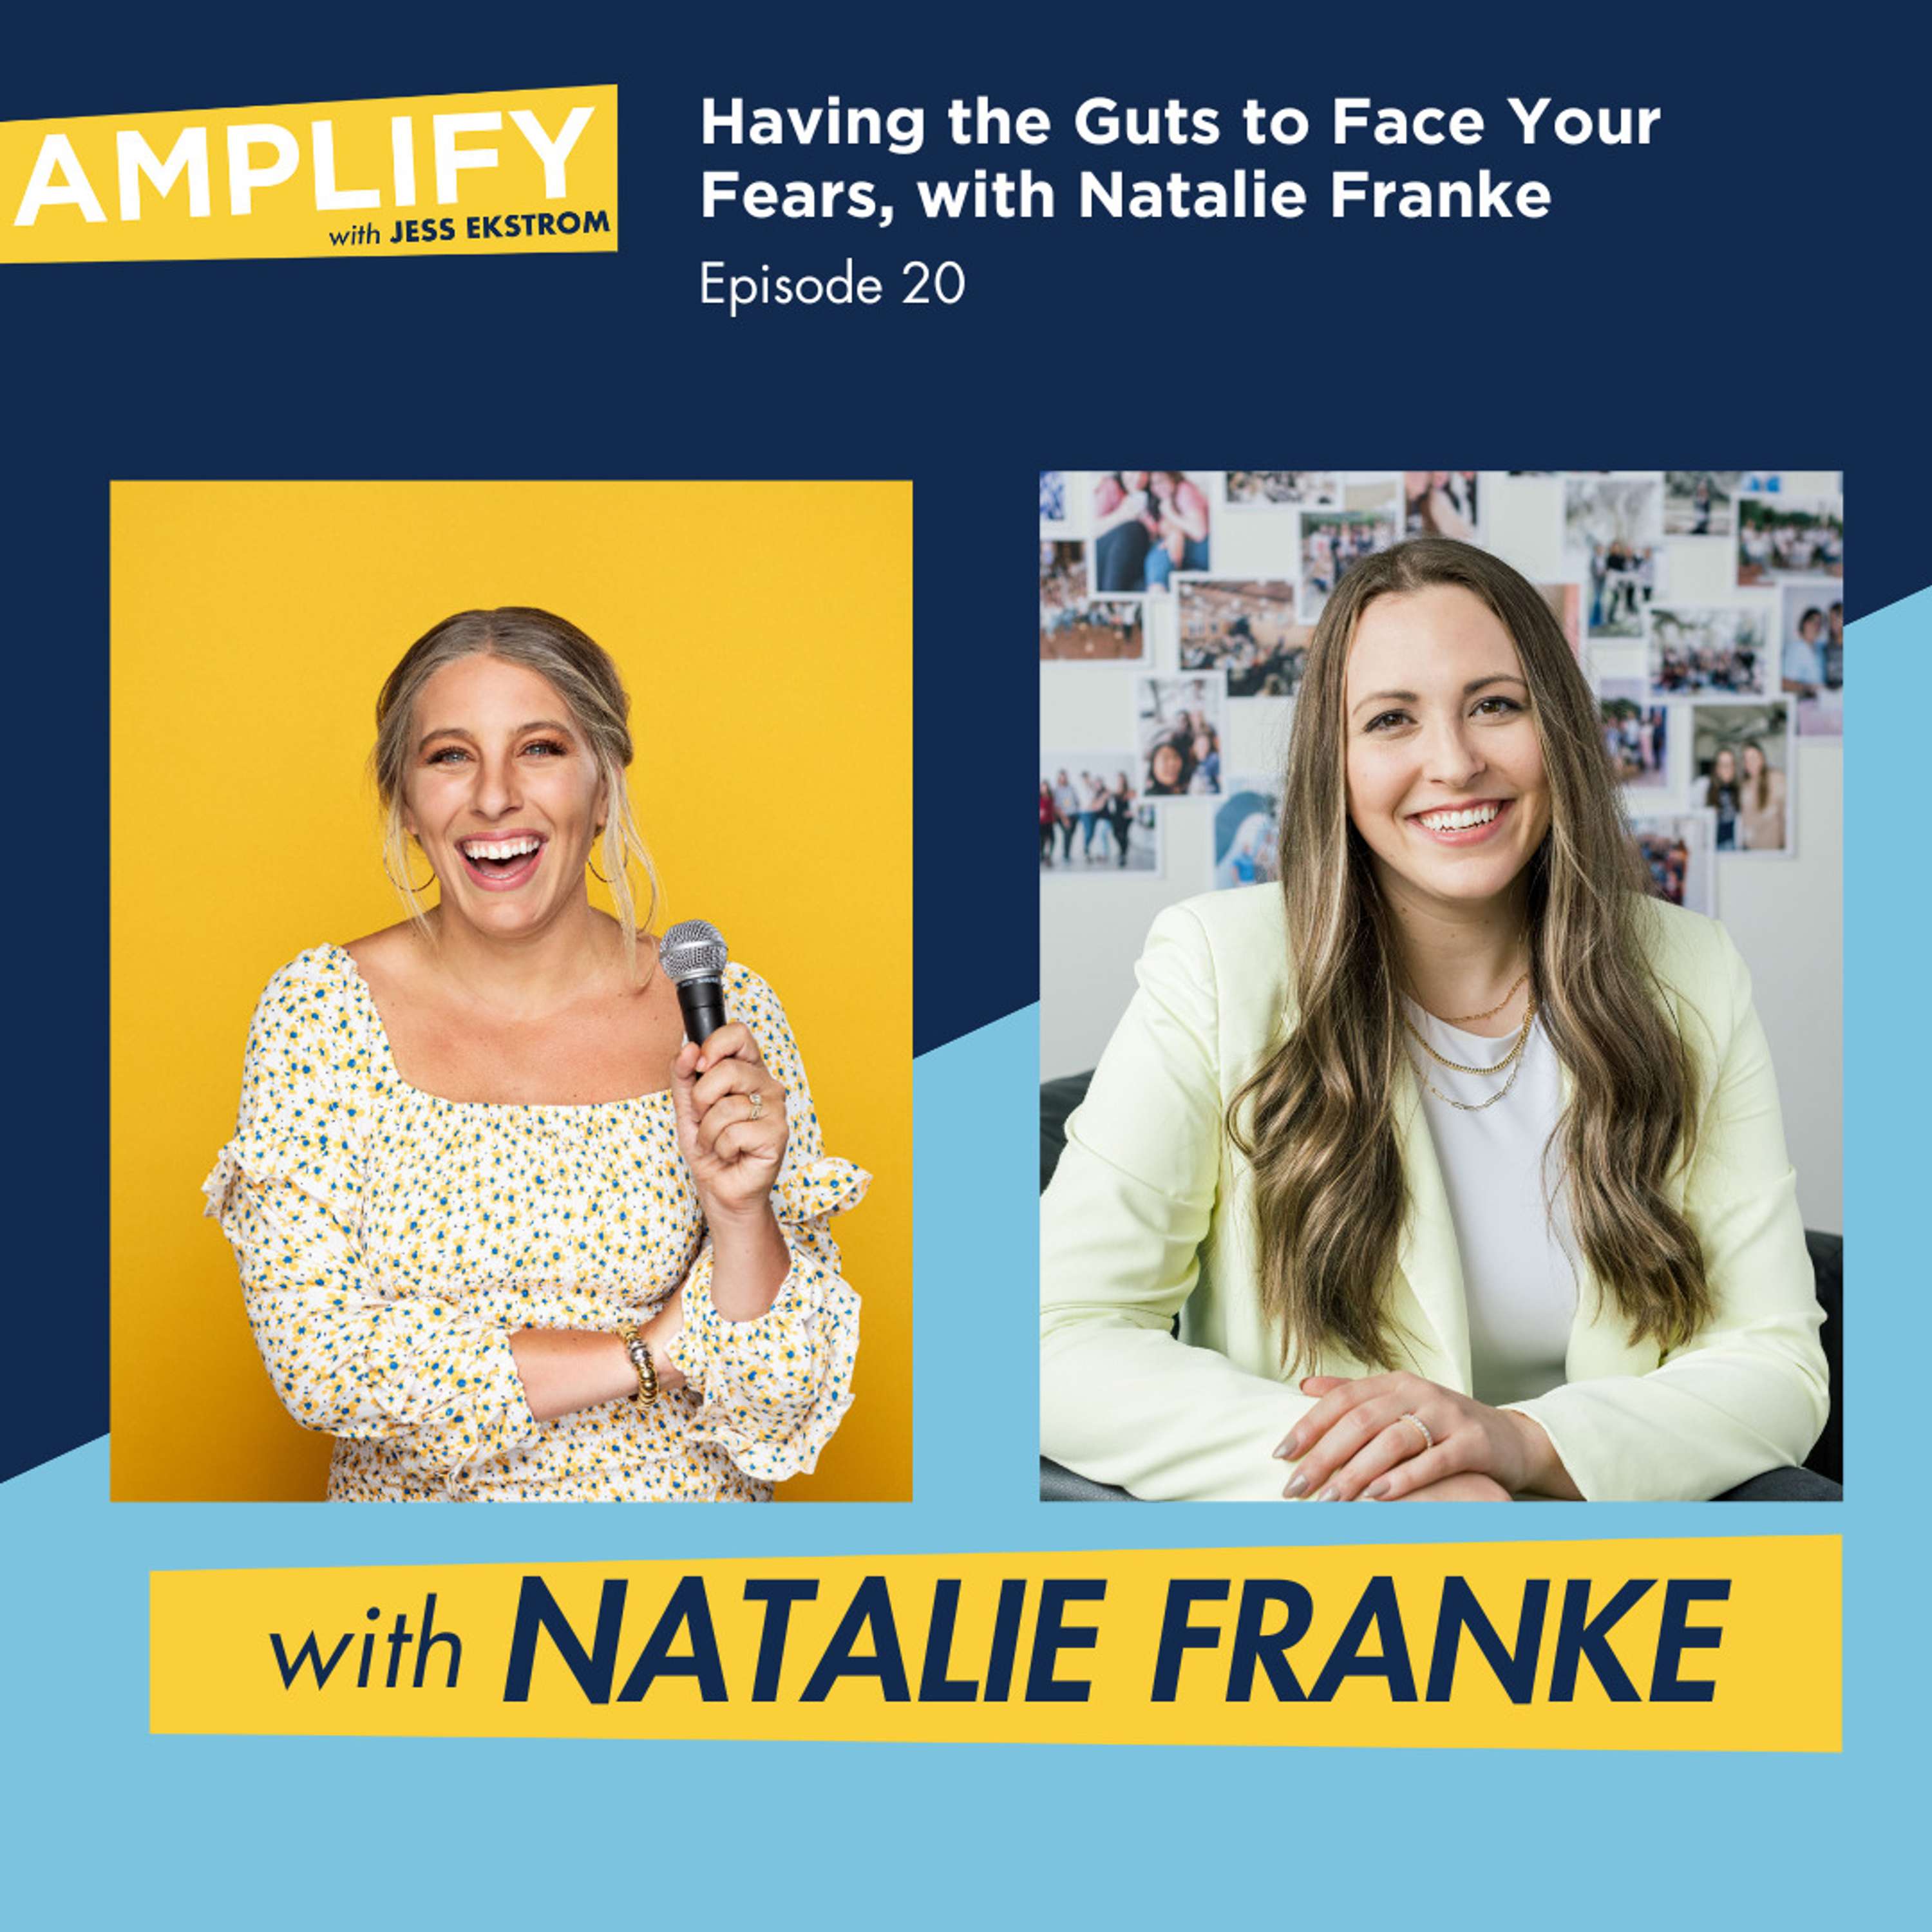 20. Having the Guts to Face Your Fears, with Natalie Franke